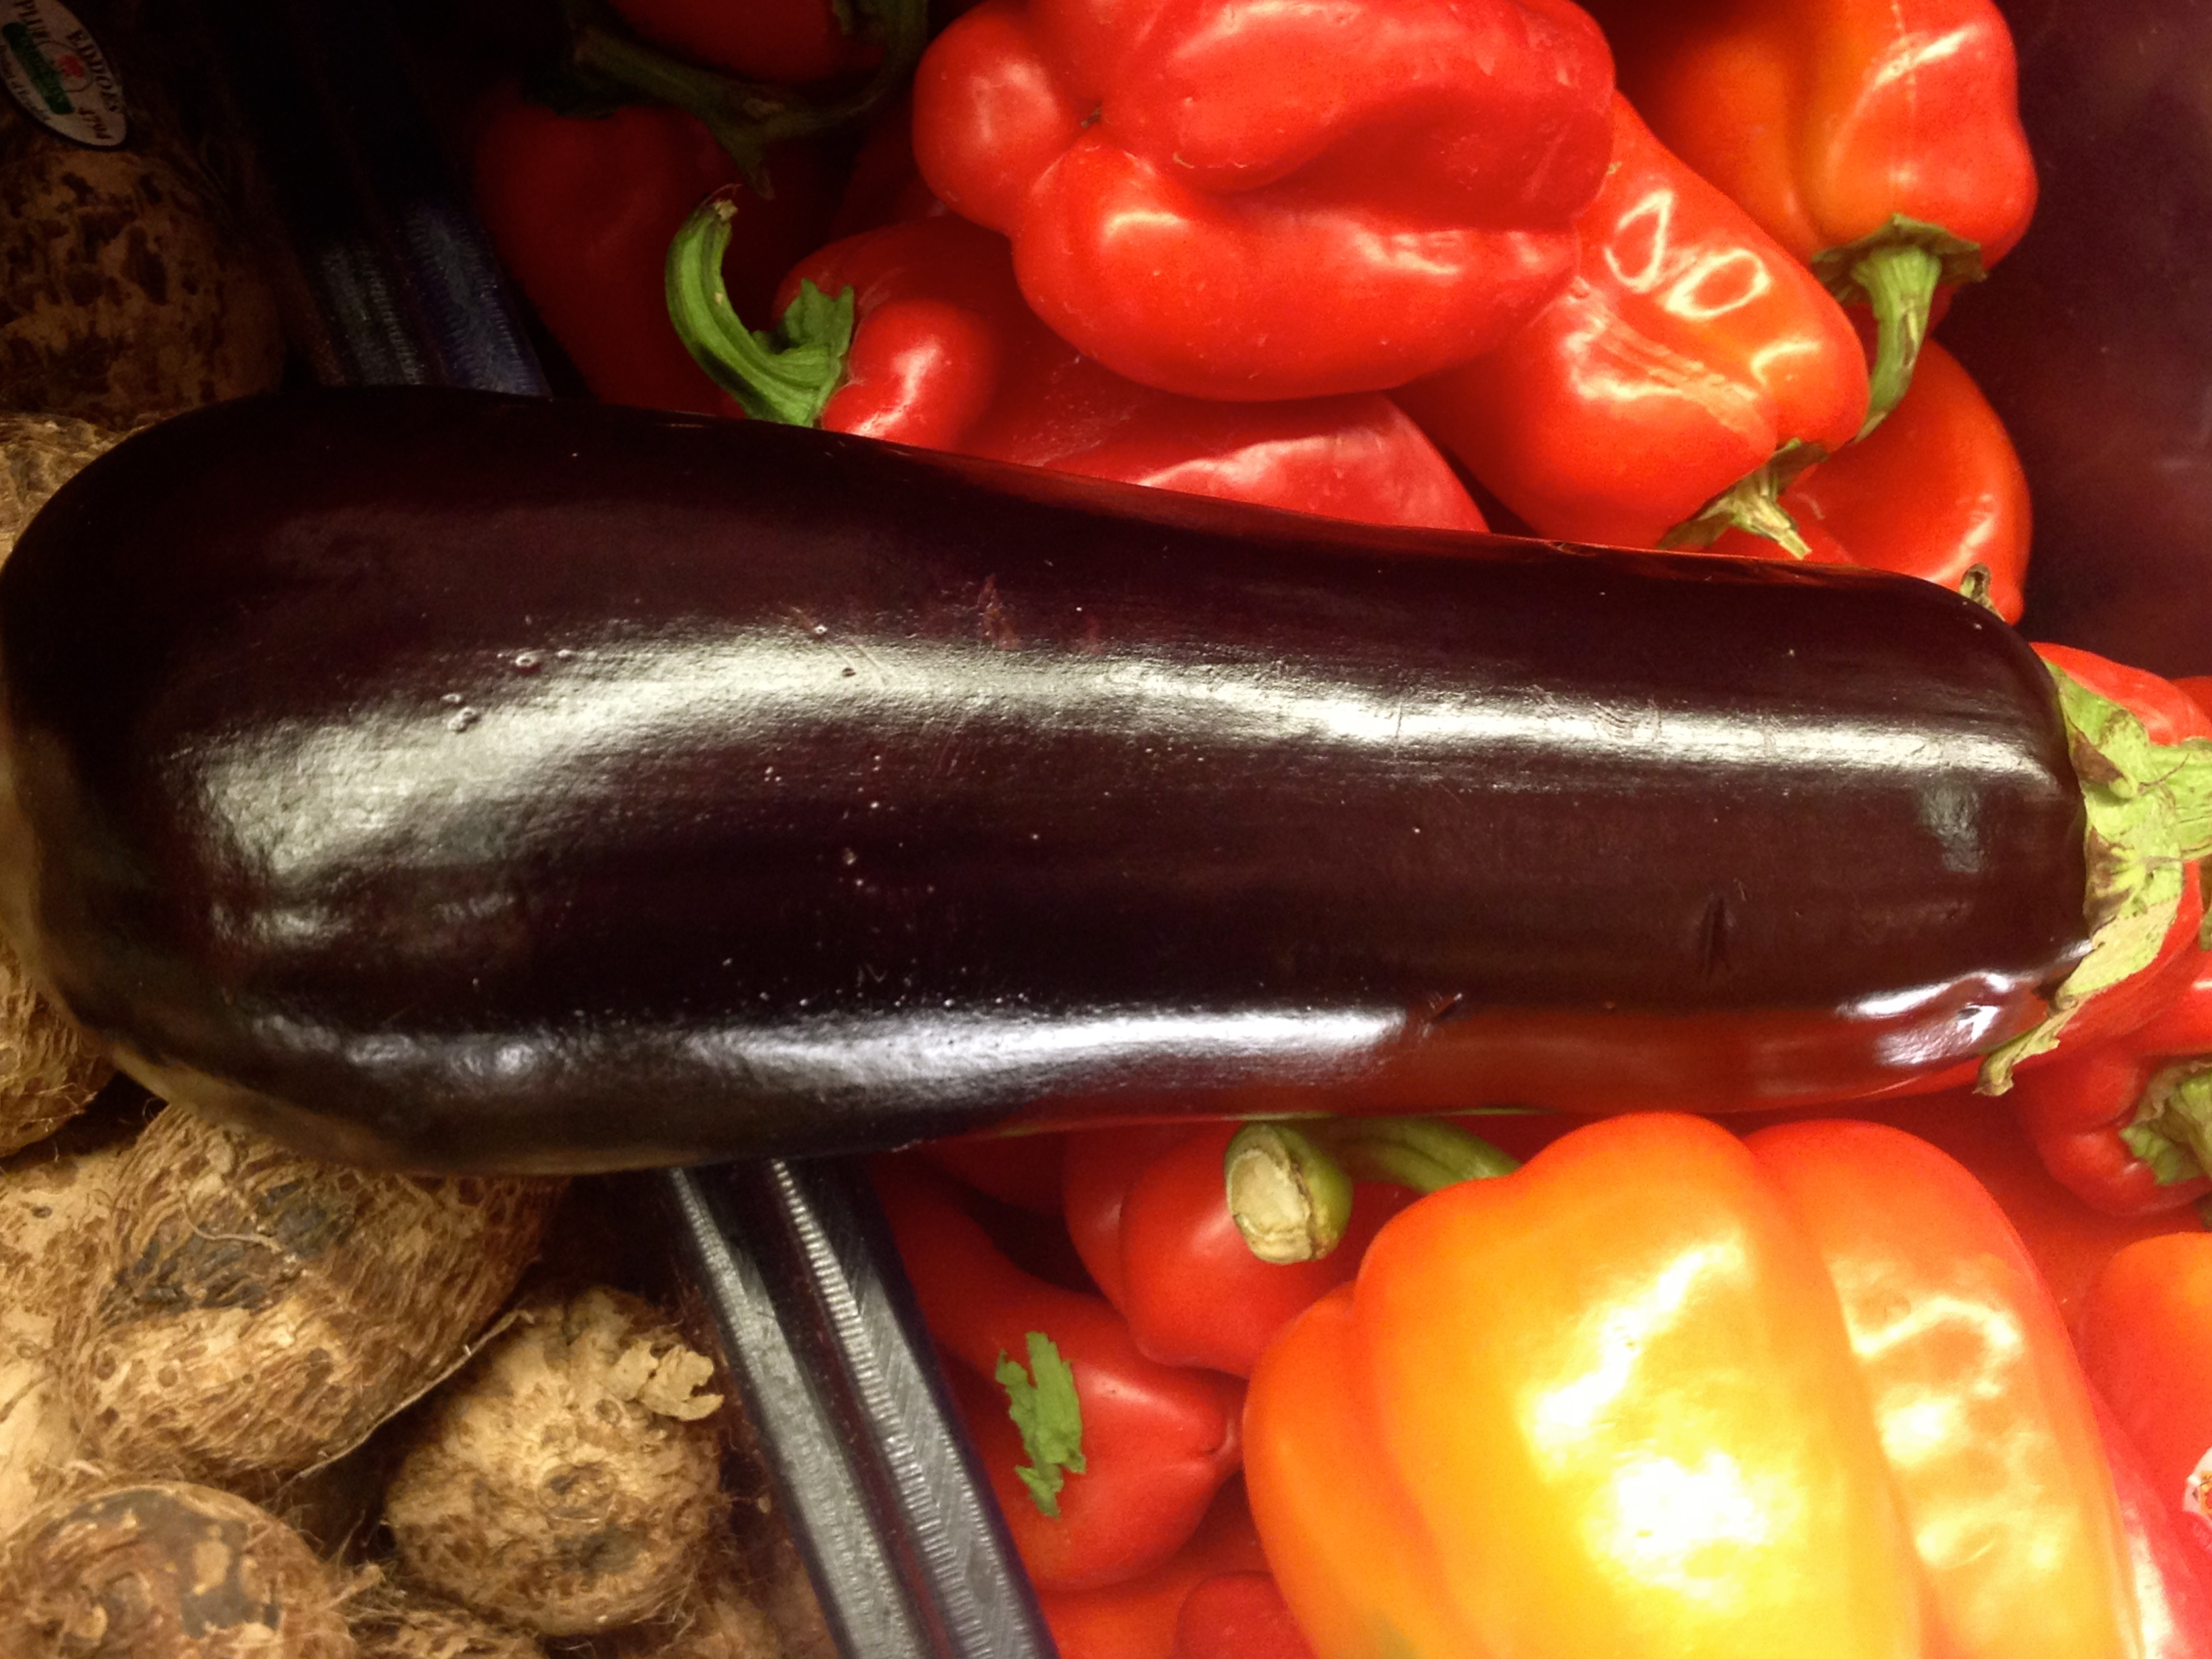 Eggplant and red and orange peppers